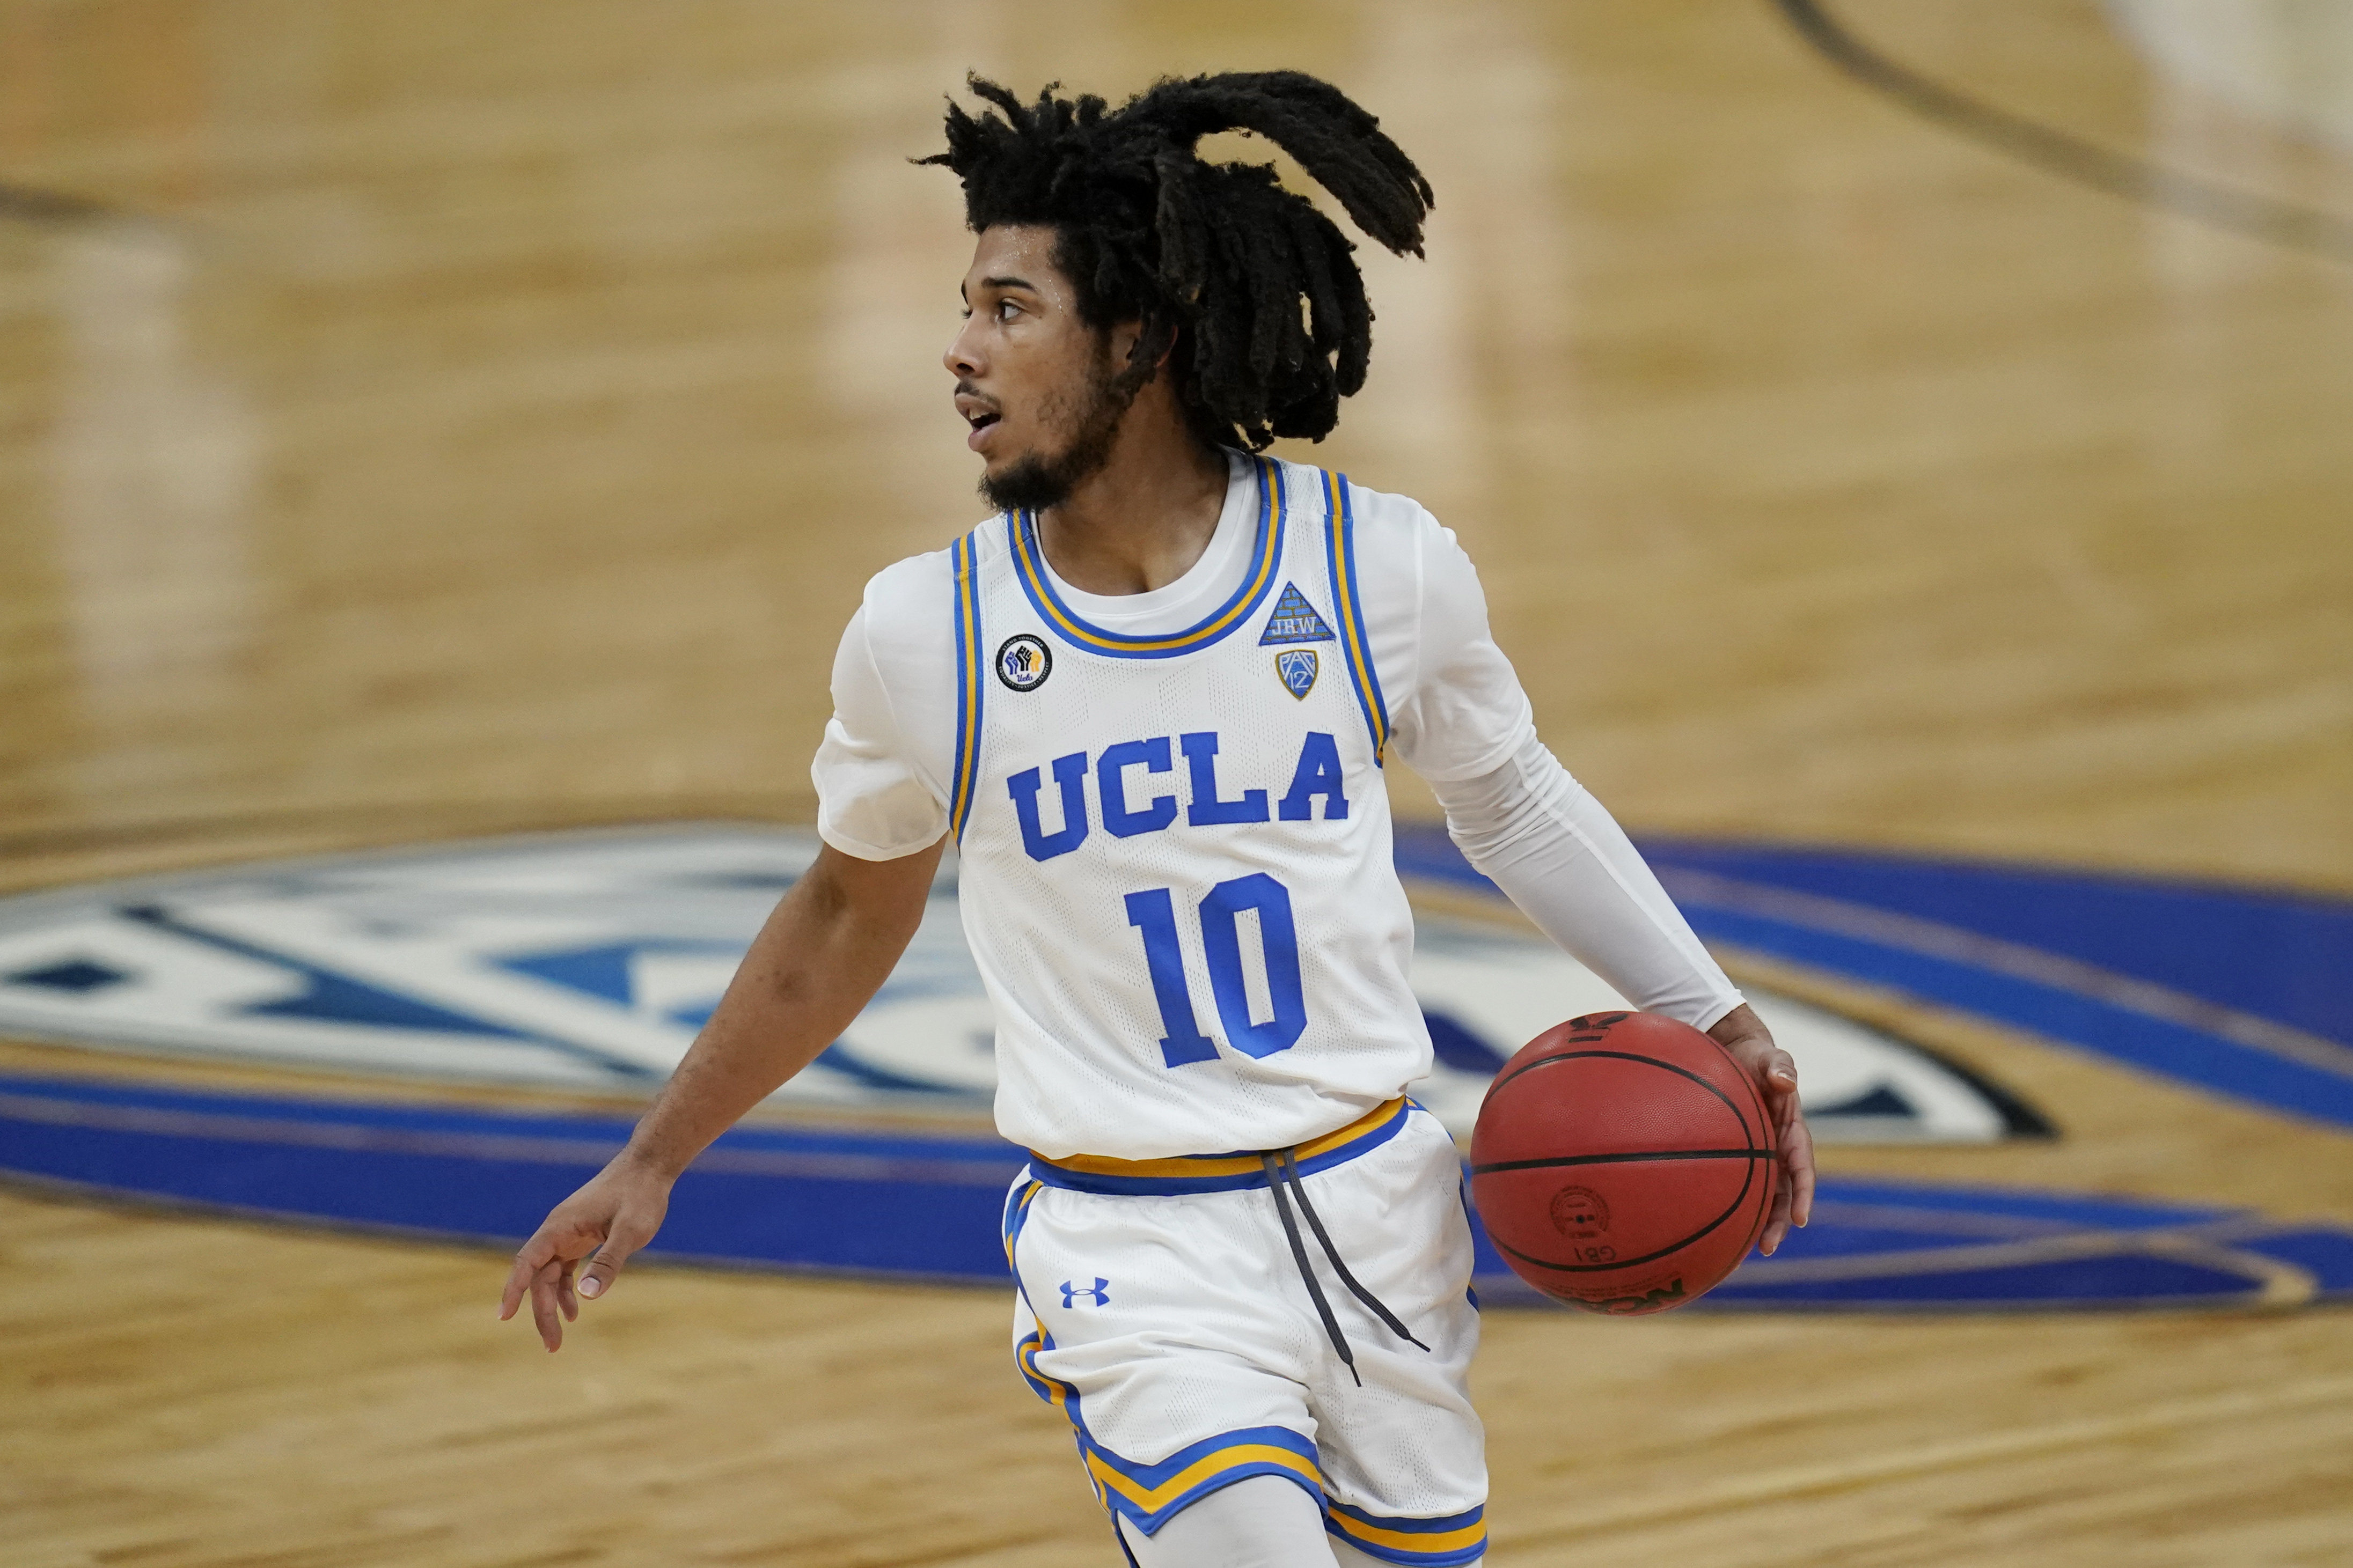 March Madness 2021 Live stream, start time, TV channel, how to watch play-in games (NCAA Tournament First Four)